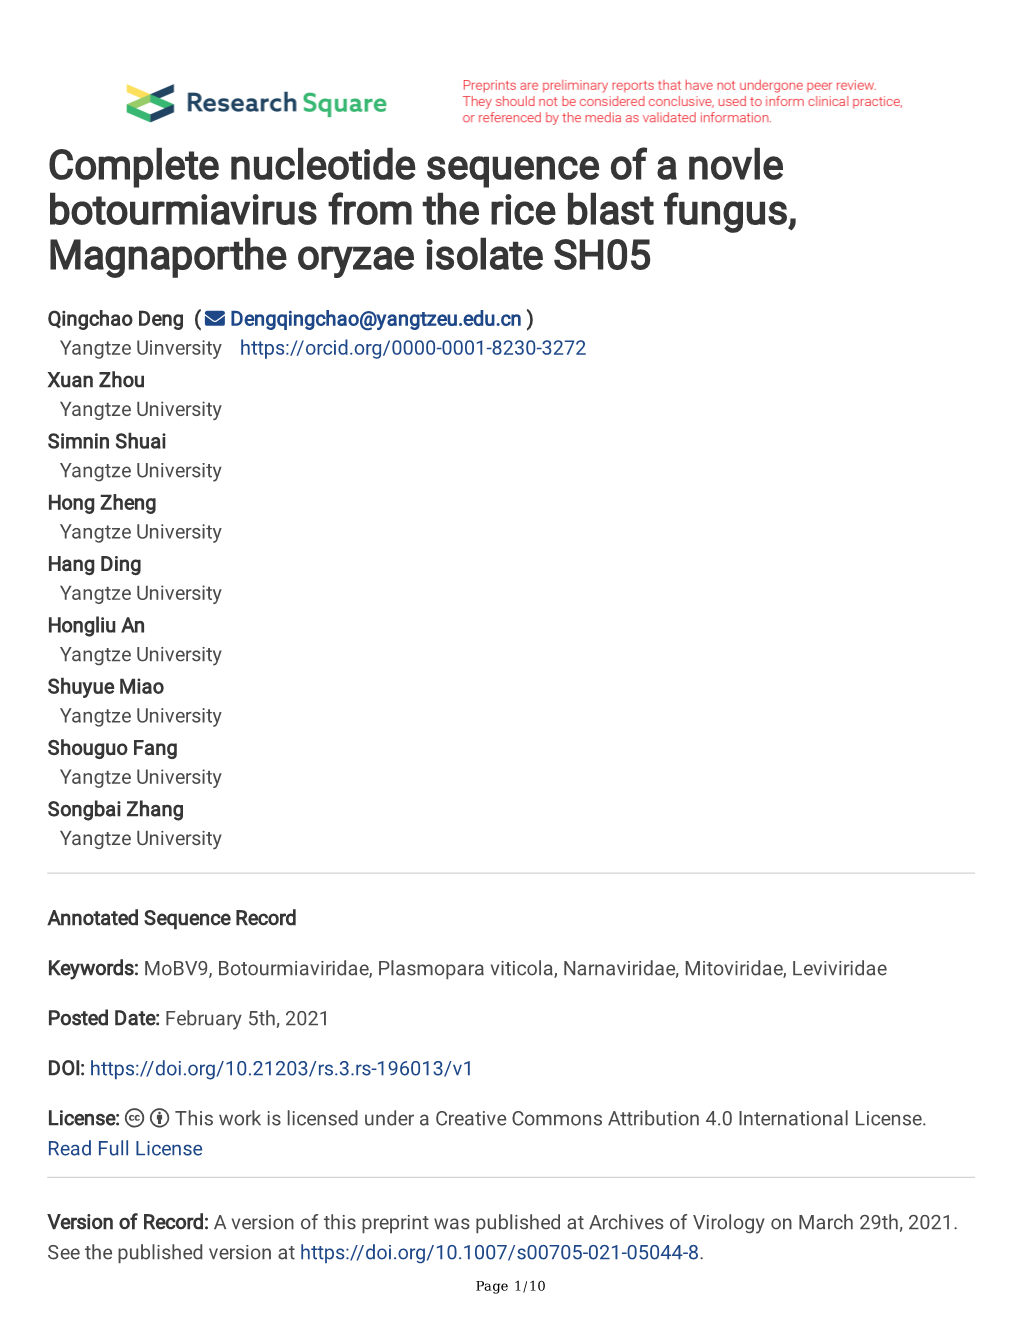 Complete Nucleotide Sequence of a Novle Botourmiavirus from the Rice Blast Fungus, Magnaporthe Oryzae Isolate SH05